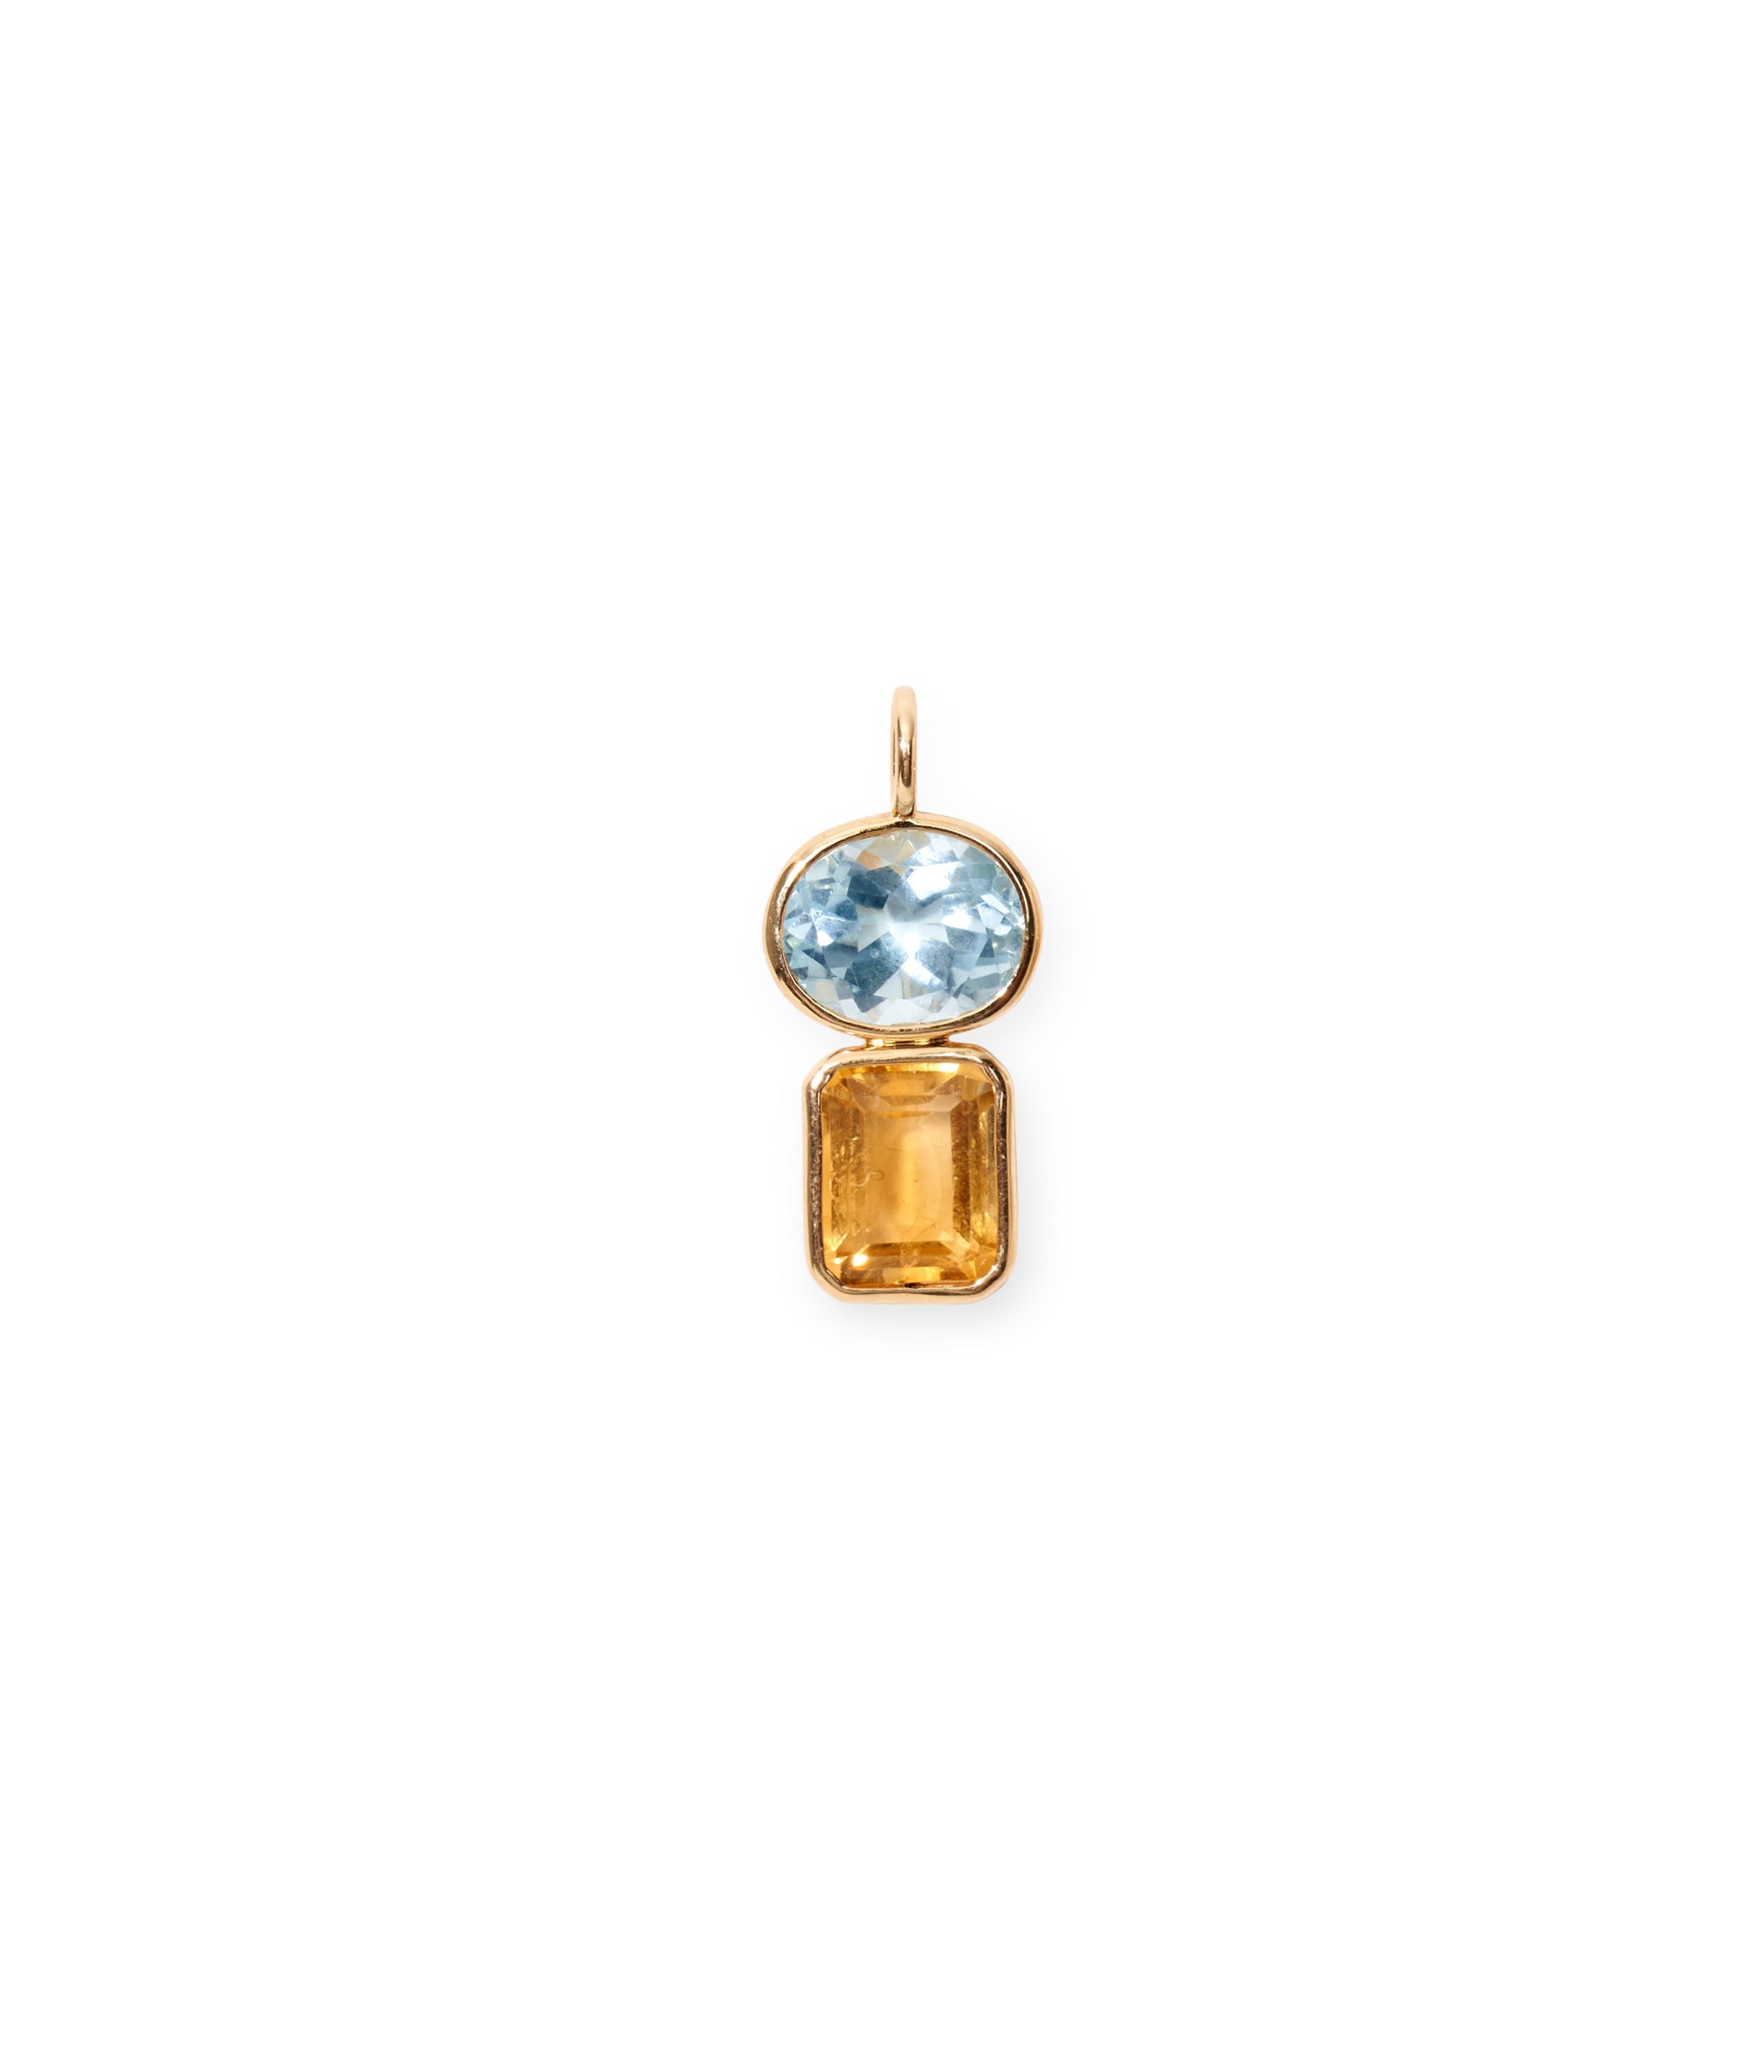 Sky Blue Topaz & Citrine 14k Gold Necklace Charm. Faceted blue topaz oval and citrine rectangle with gold bezels